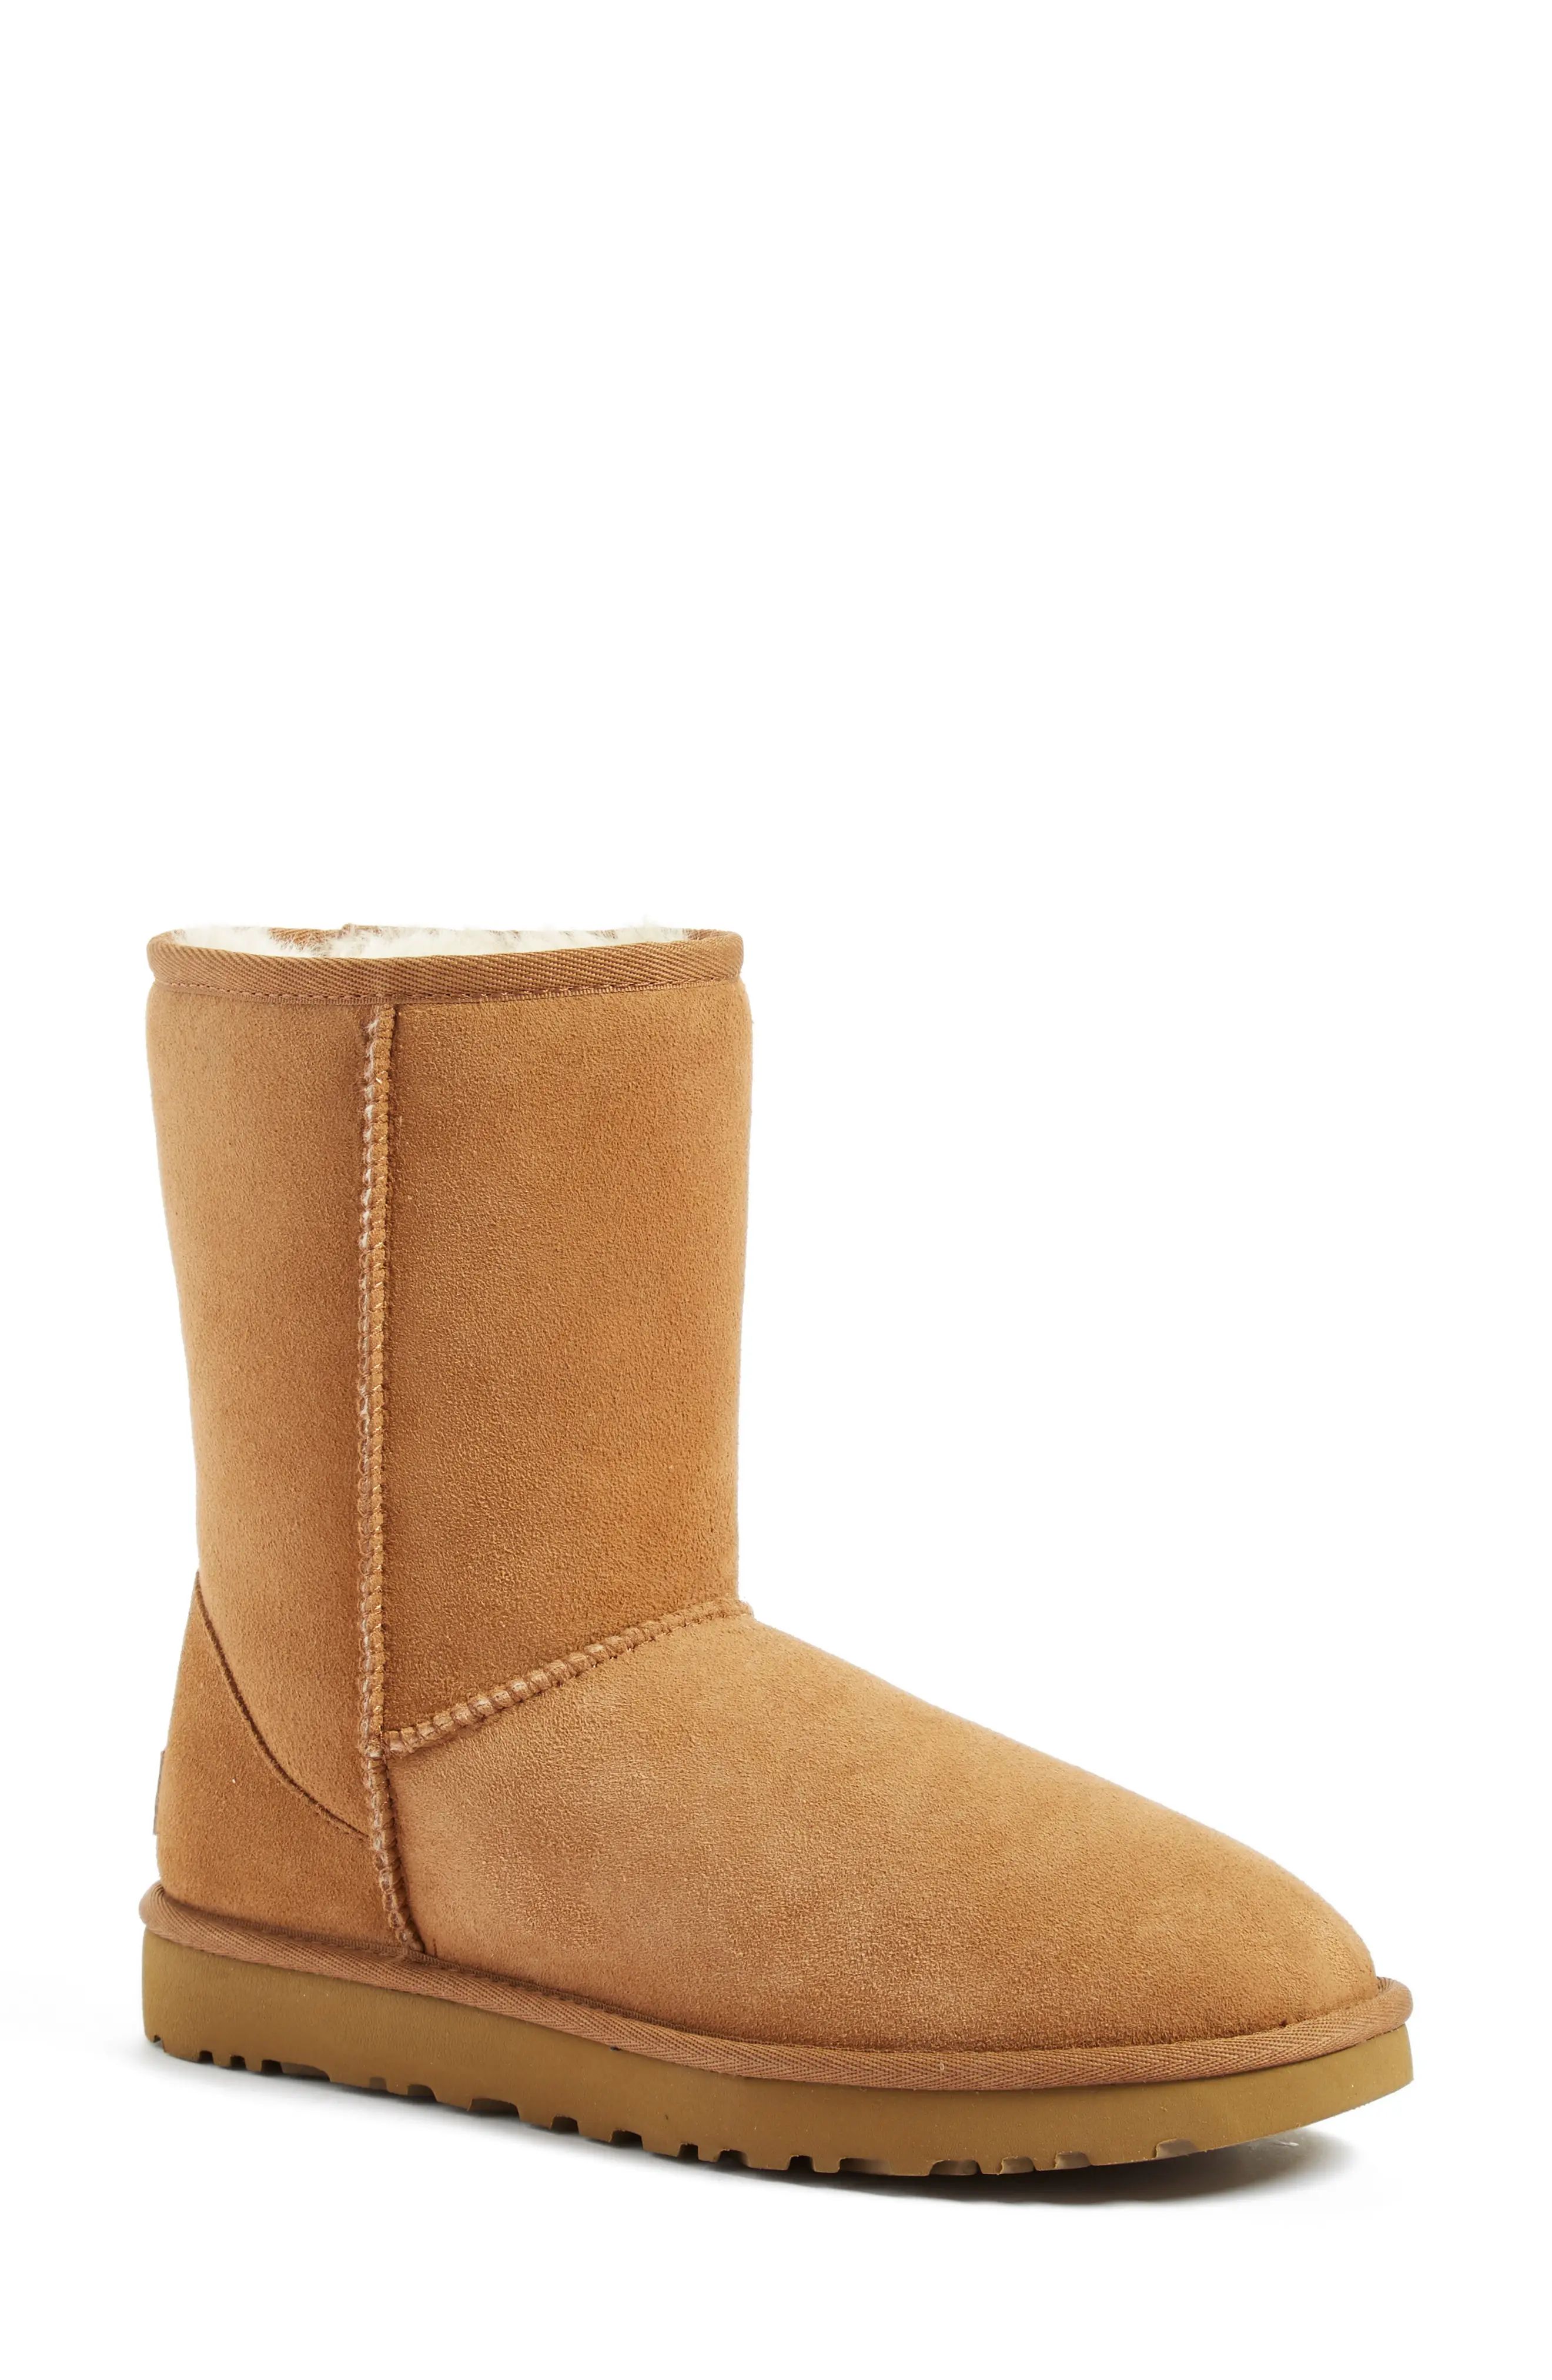 Women's UGG Classic Ii Genuine Shearling Lined Short Boot, Size 8 M - Brown | Nordstrom